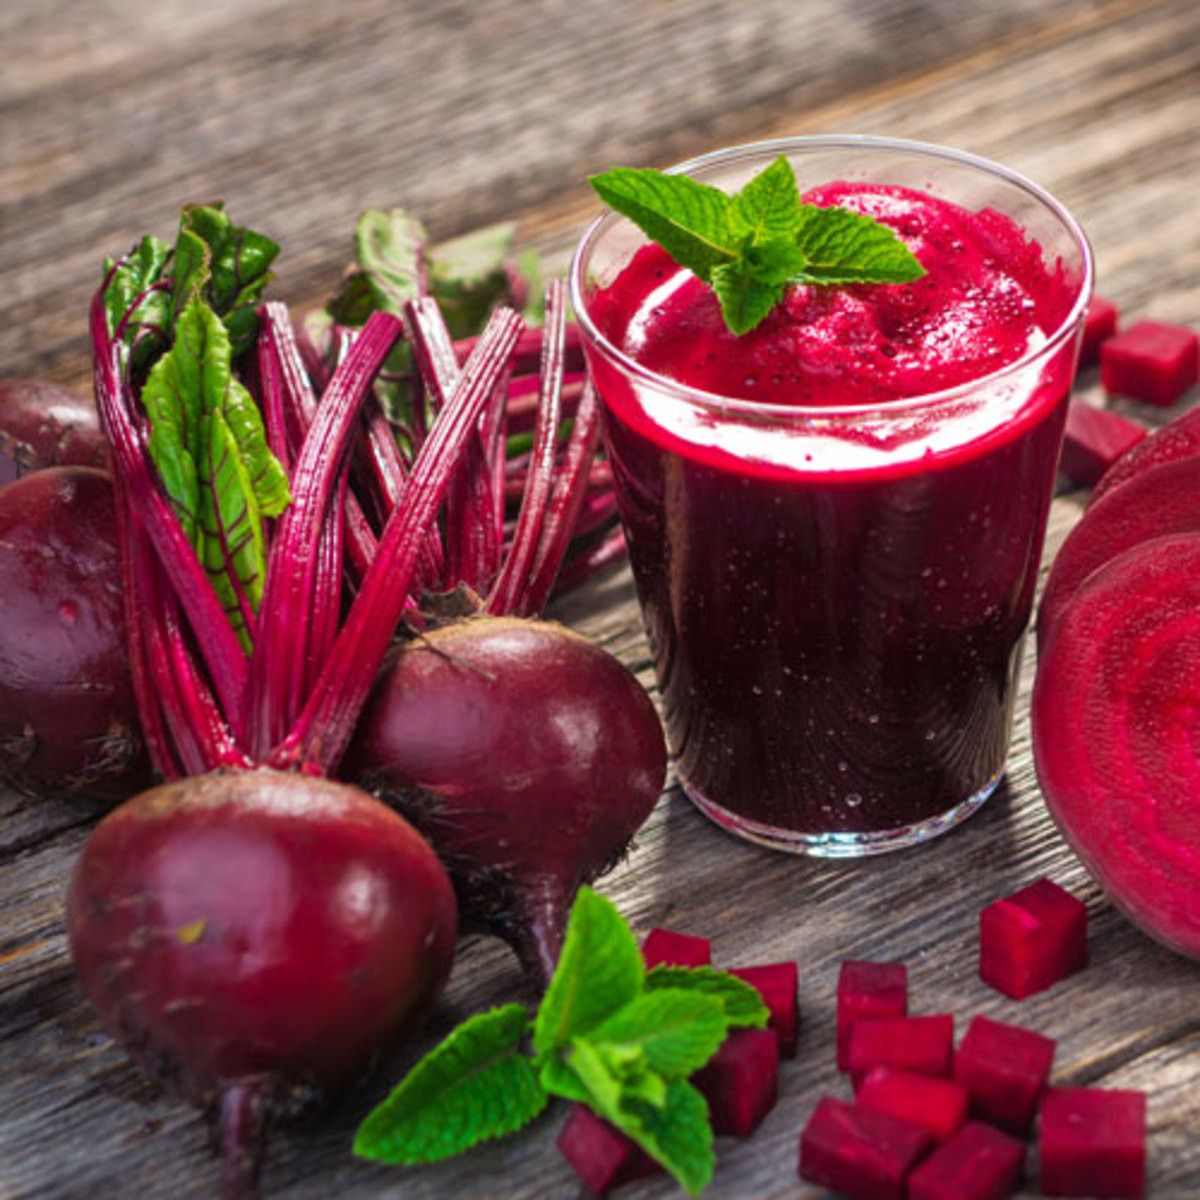 Beet Smoothie Recipes
 "Green" Red Beet Smoothie Recipe